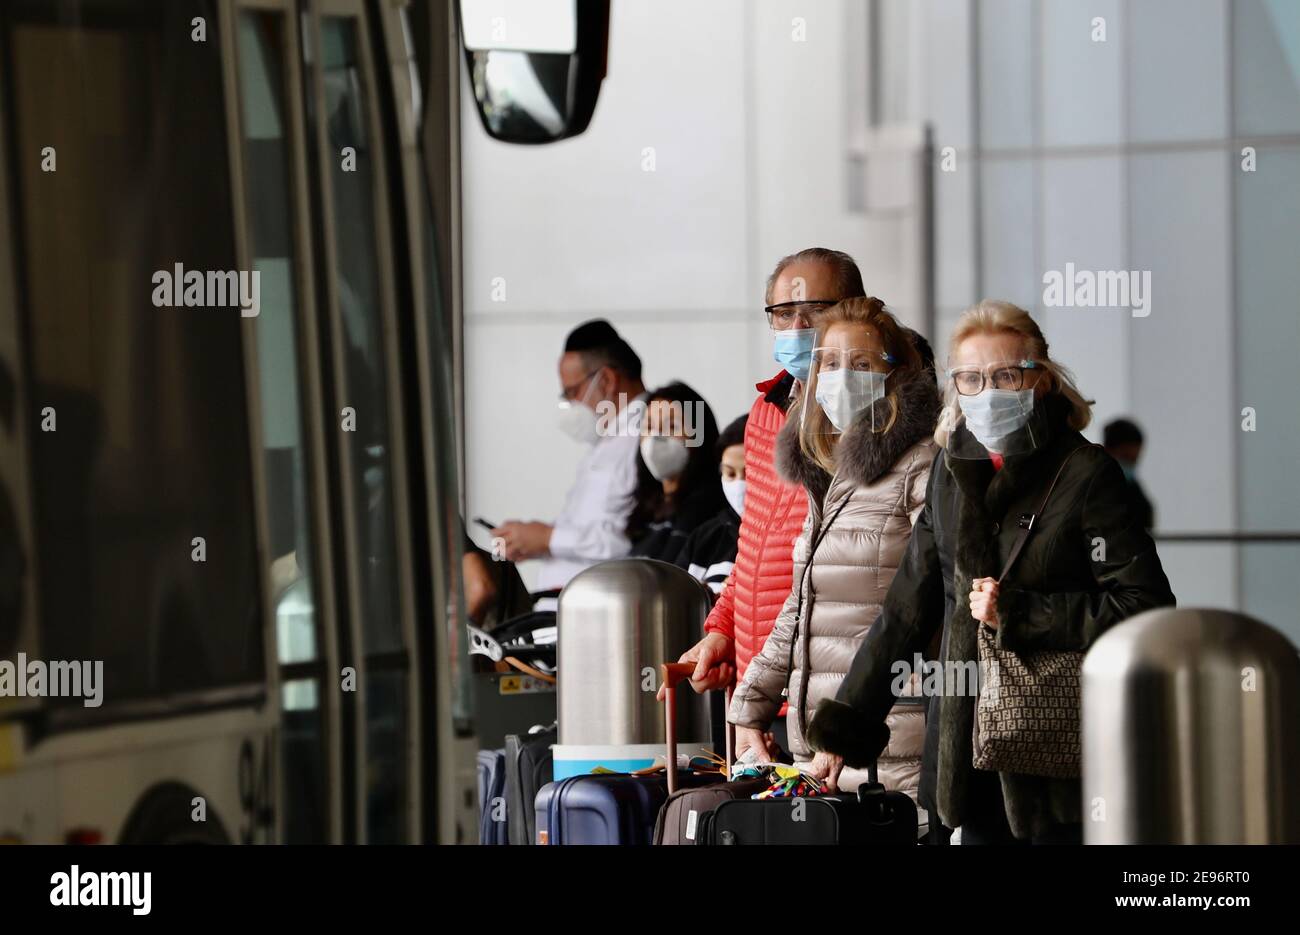 (210203) -- BEIJING, Feb. 3, 2021 (Xinhua) -- Travelers with face masks wait for public transportation services at the International Airport in Los Angeles, California, the United States, on Feb. 1, 2021. Beginning Tuesday, Americans are required to wear face masks while traveling on domestic public transport as part of a national strategy to curb the spread of COVID-19. The rule, issued by the U.S. Centers for Disease Control and Prevention (CDC), applies to passengers on airplanes, trains, subways, buses, taxis and ride-shares. And it extends to waiting areas such as airports, train platfo Stock Photo